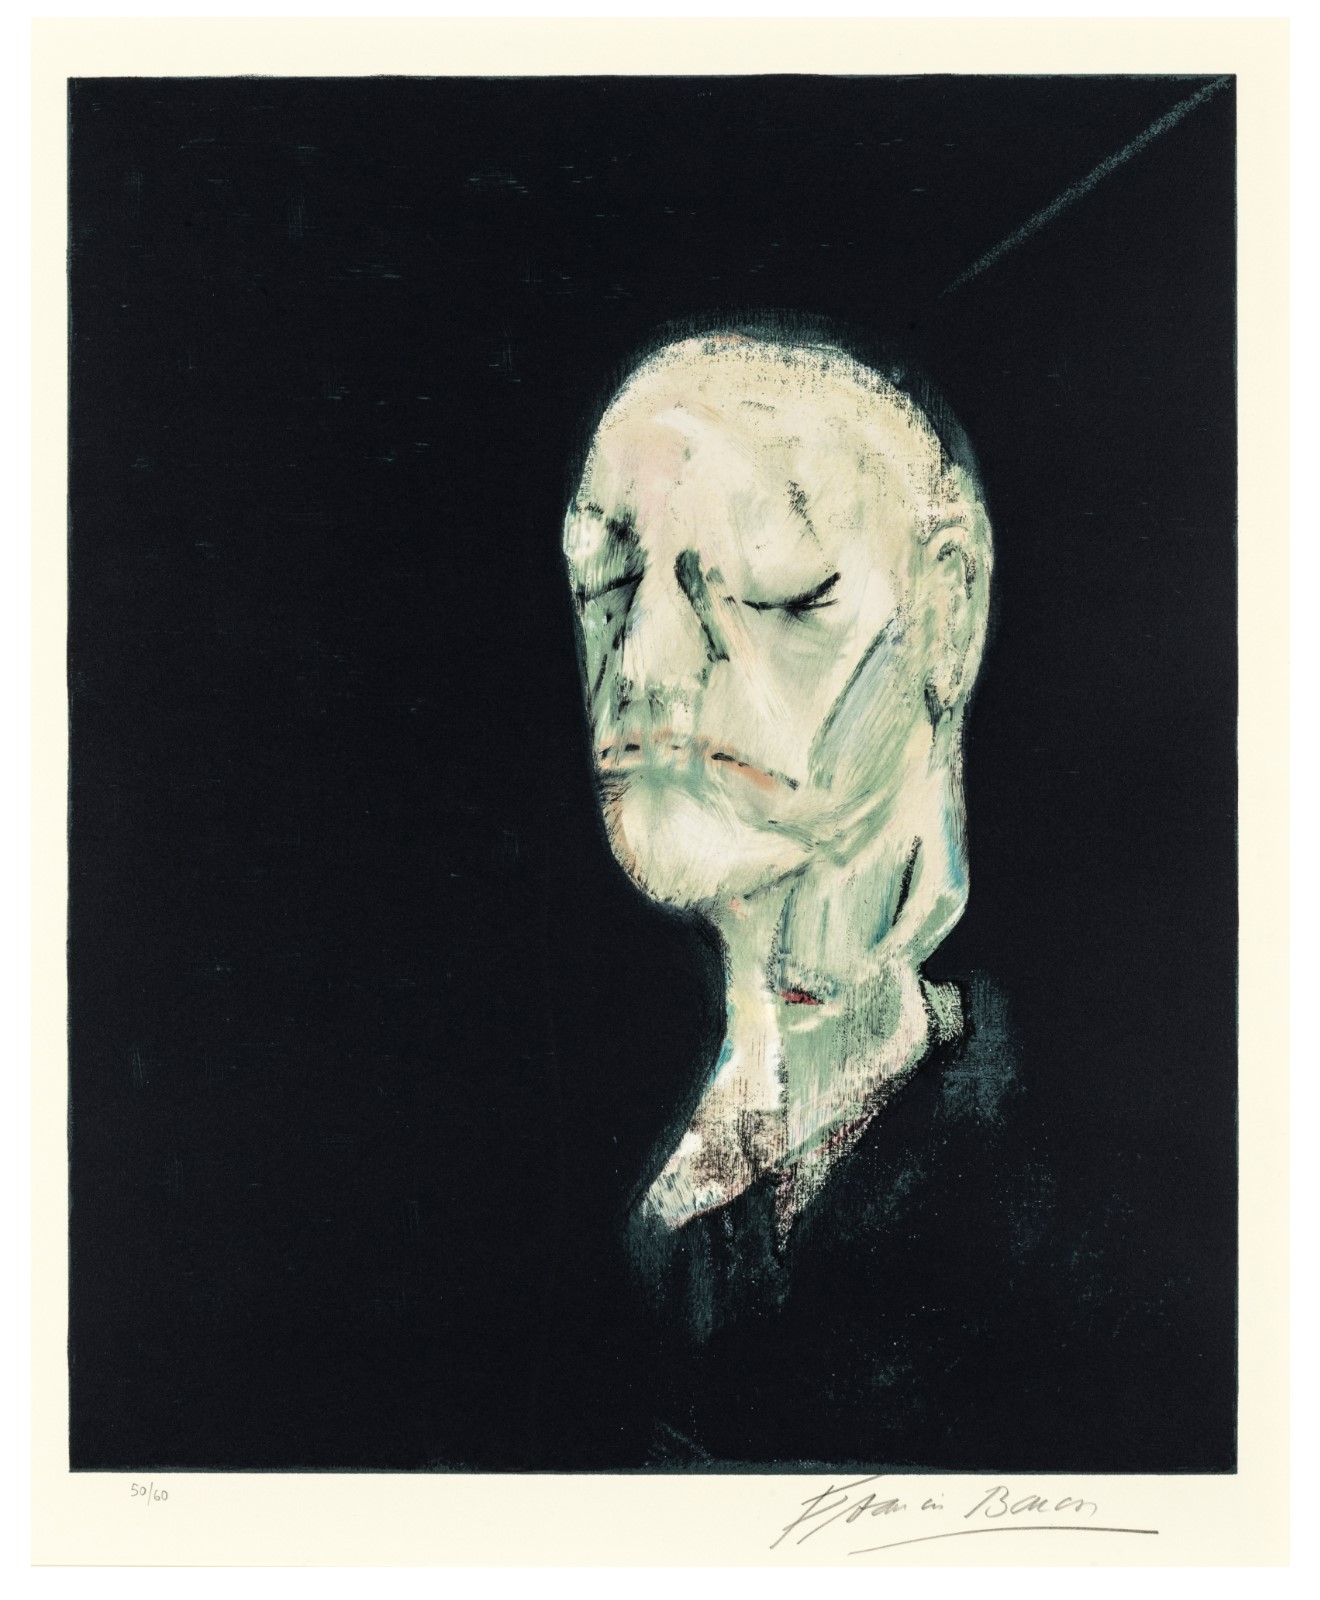 The Life Mask of William Blake (S. 27)